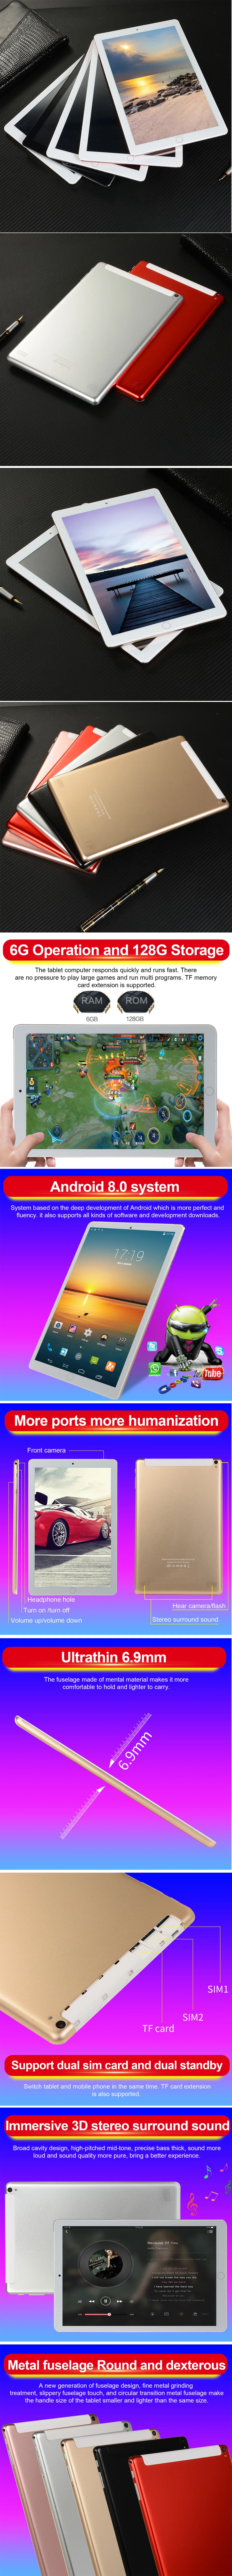 cheap tablet with stylus Tablet android 10.0 10.1 inch Tablete 6GB RAM +128GB ROM PAD Notbook Tablette Sale 10 core Touch Screen GPS Android 10.0 best budget tablet